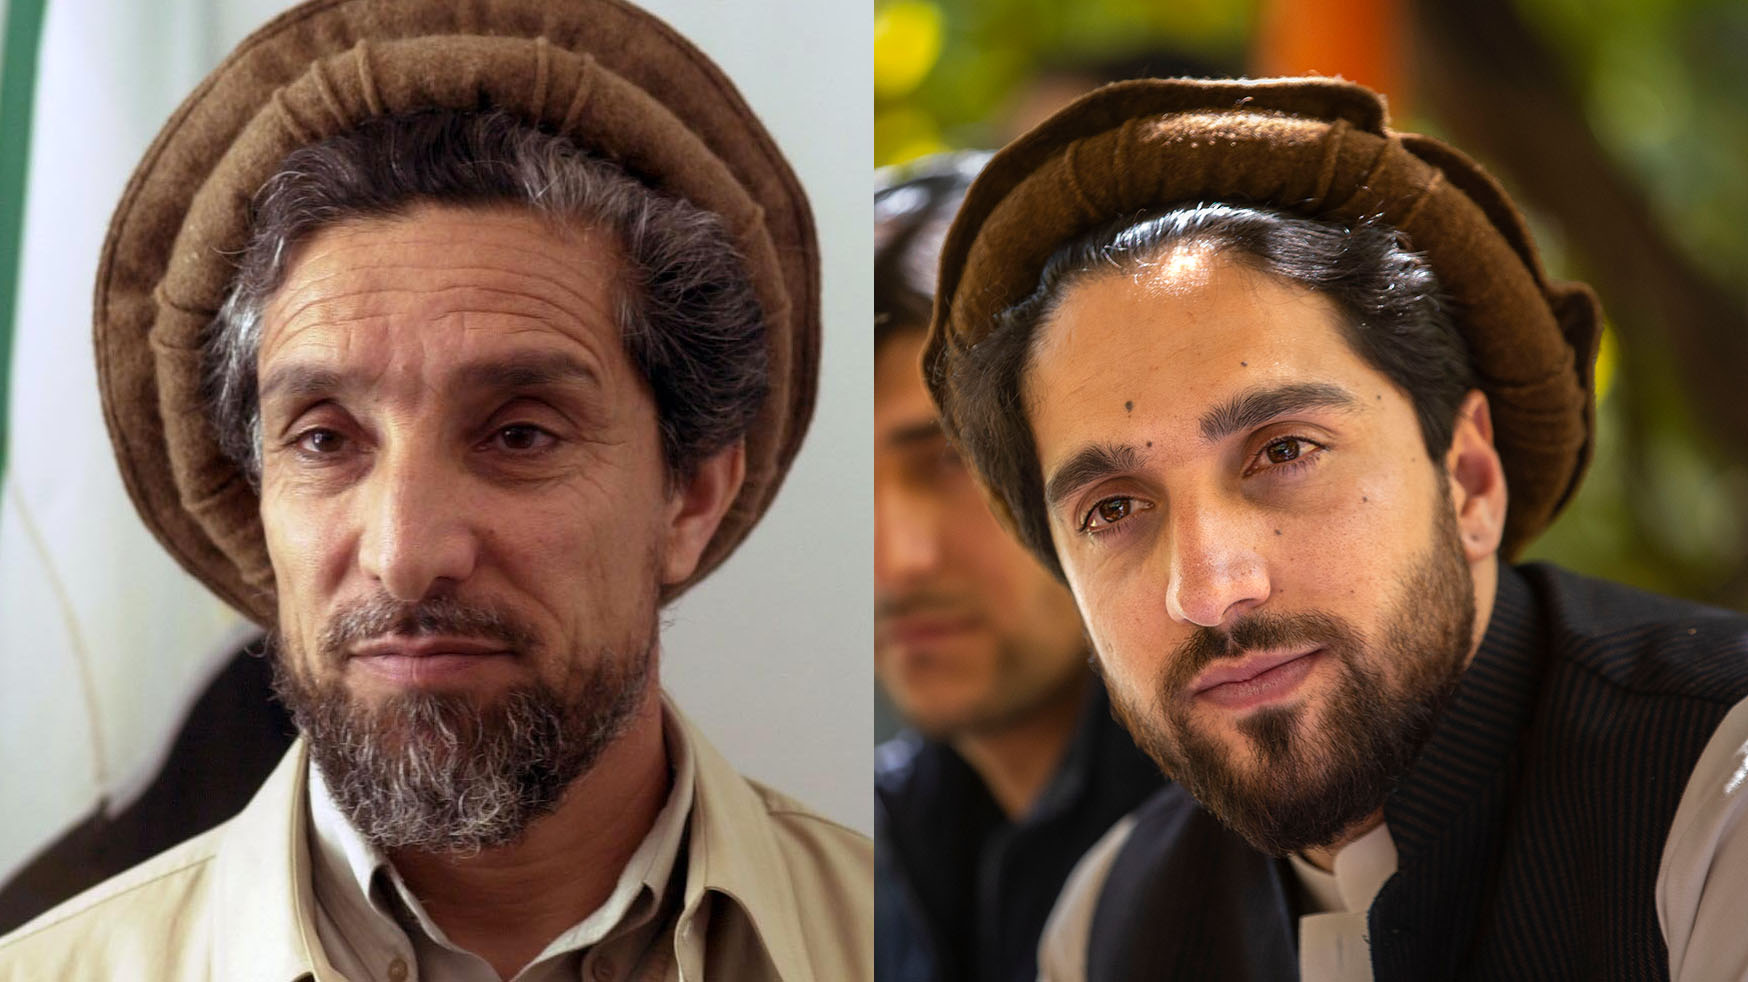 The young Massoud is leading the “Resistance 2.0” in the Panjshir valley.